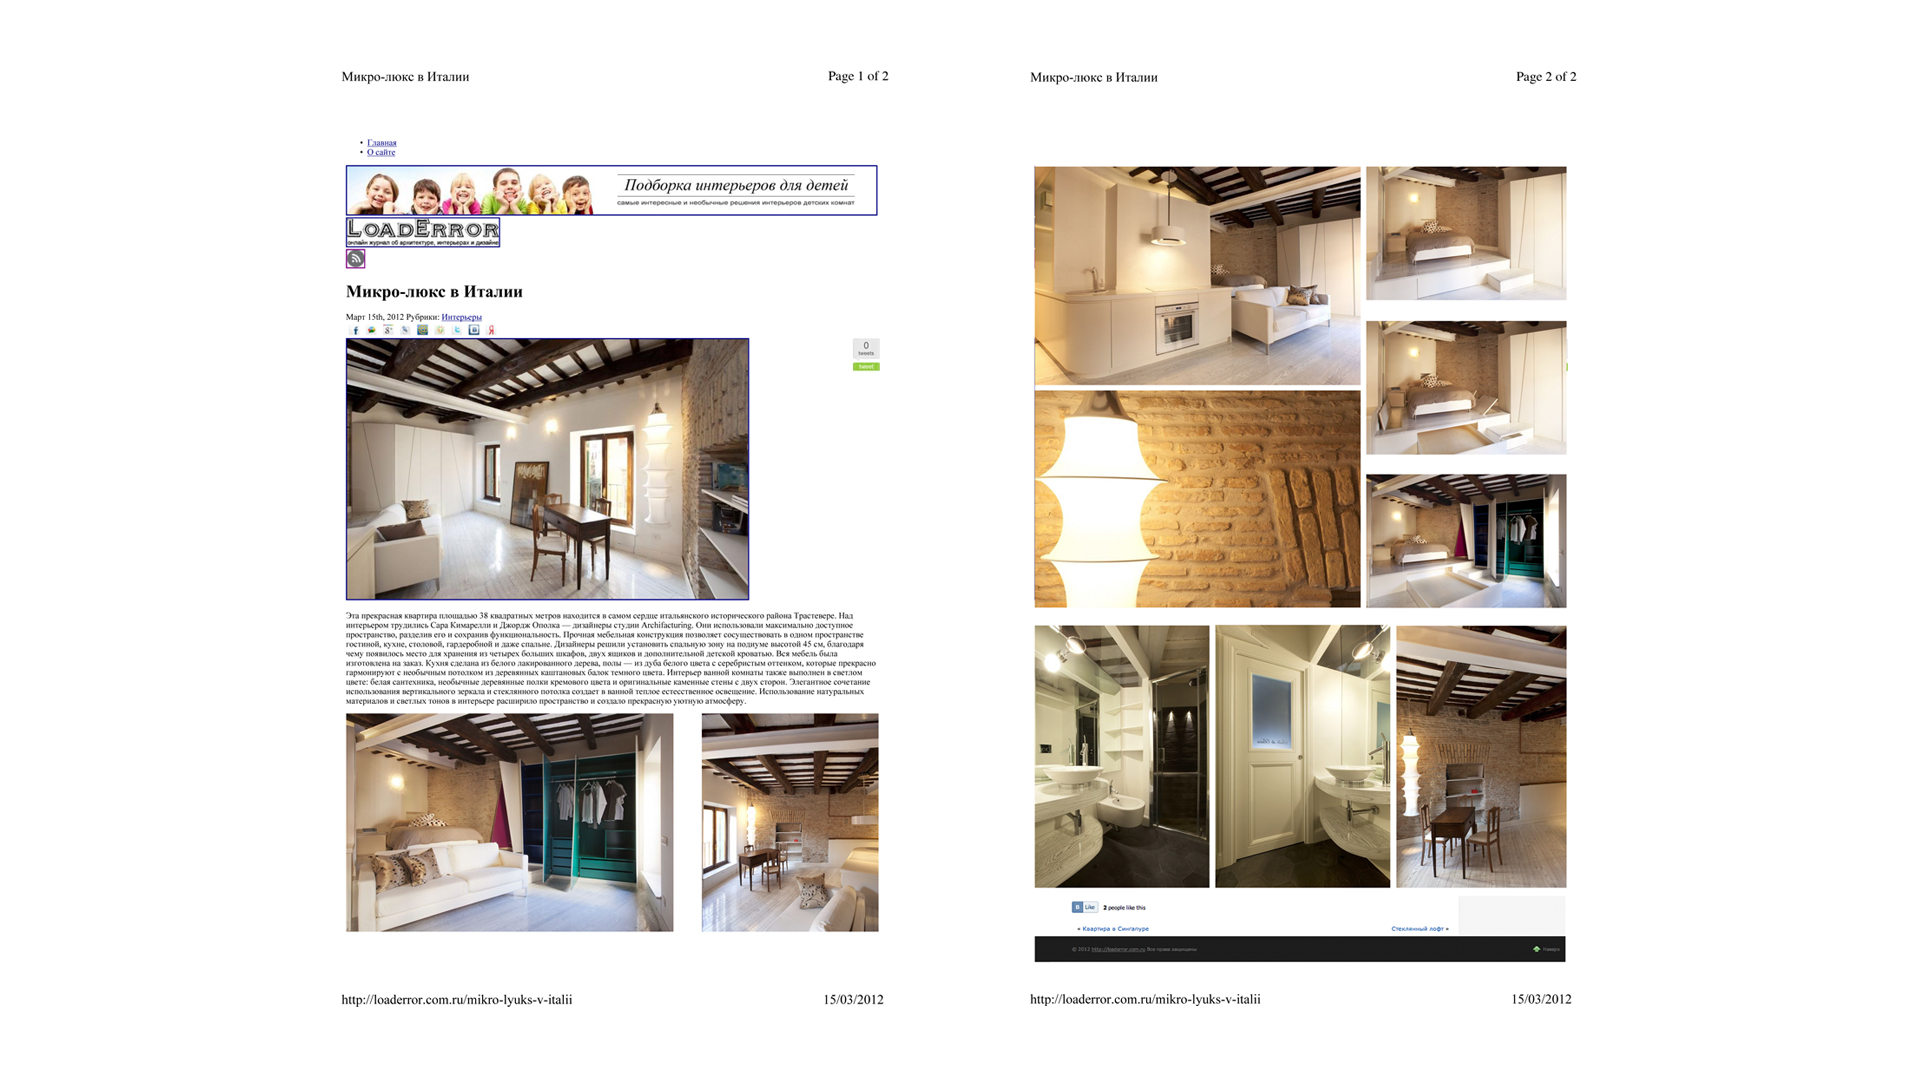 ArchiFacturing - Publications